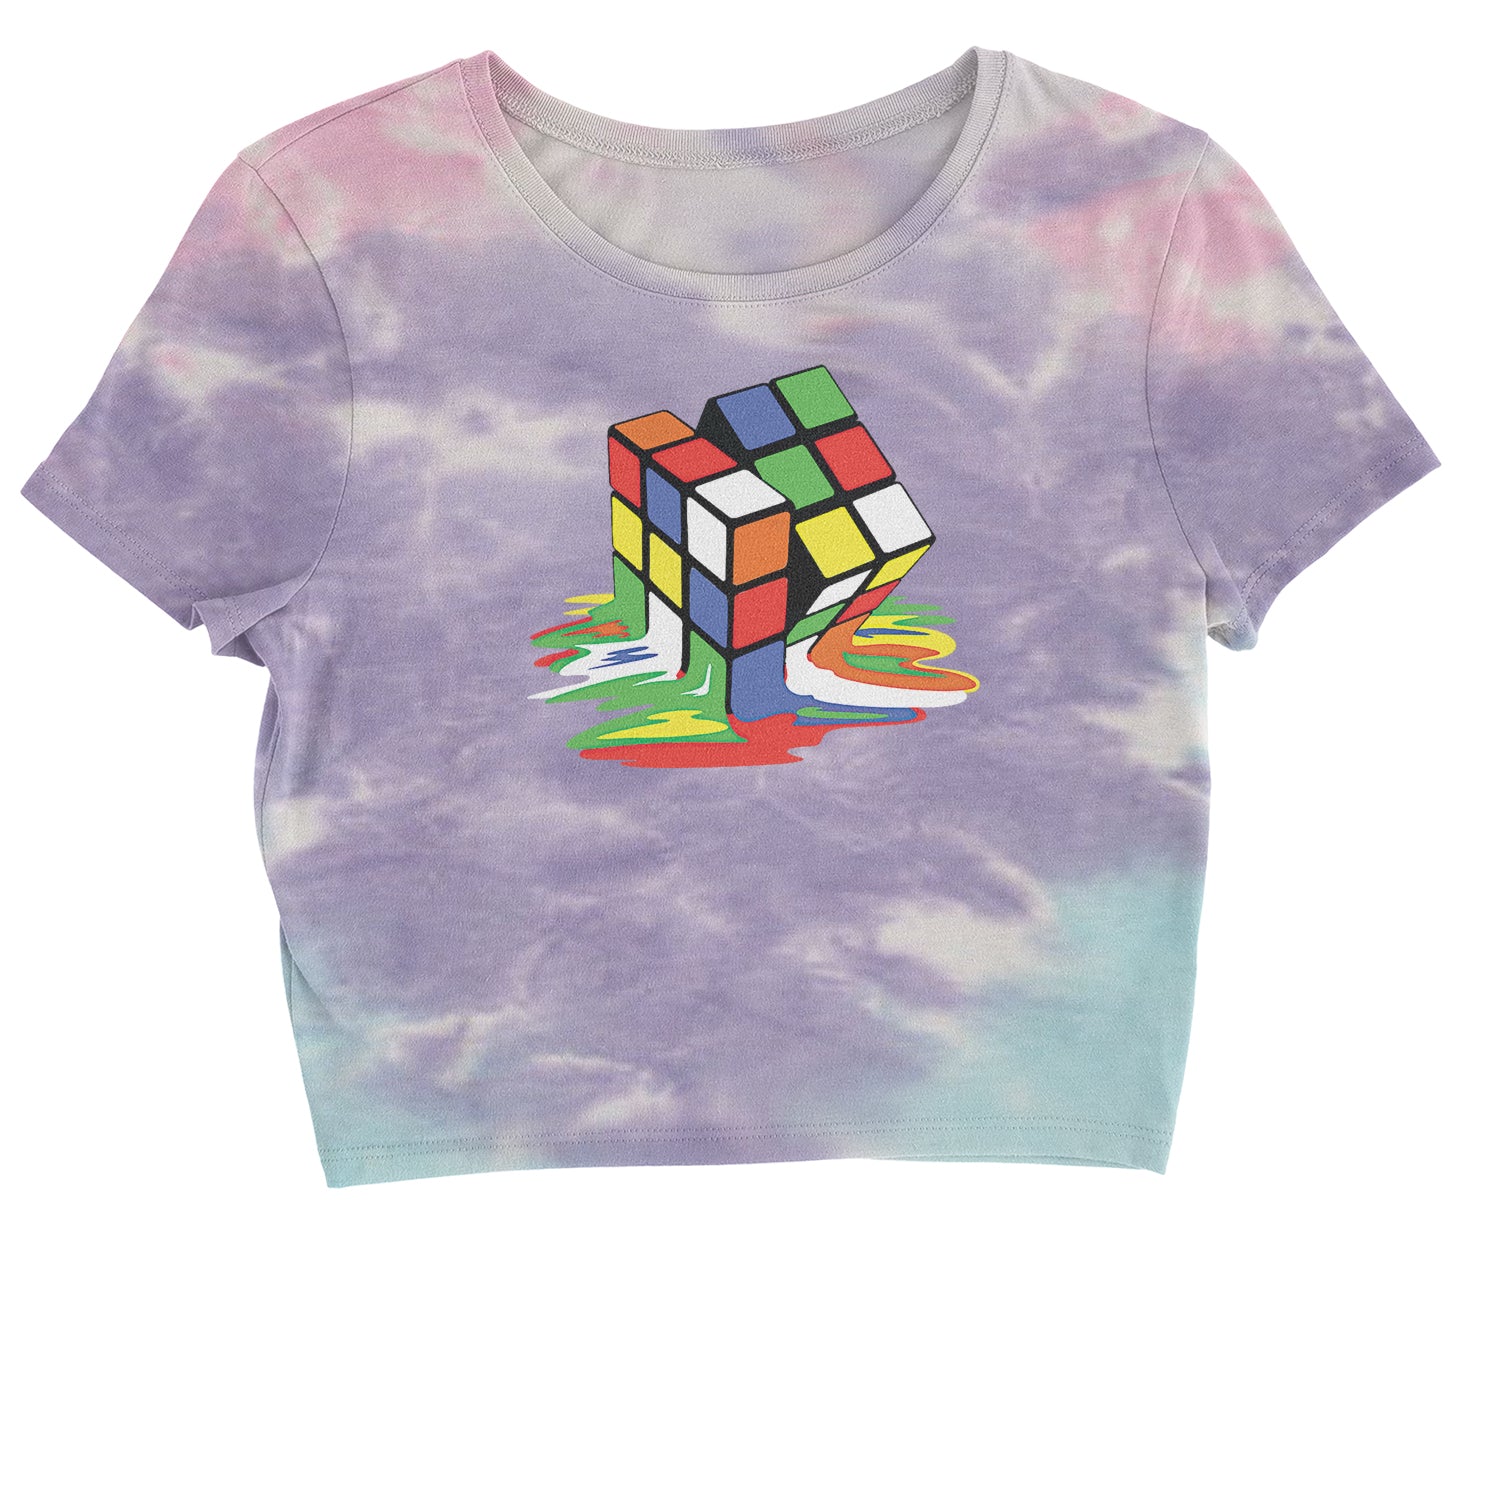 Melting Multi-Colored Cube Cropped T-Shirt gamer, gaming, nerd, shirt by Expression Tees